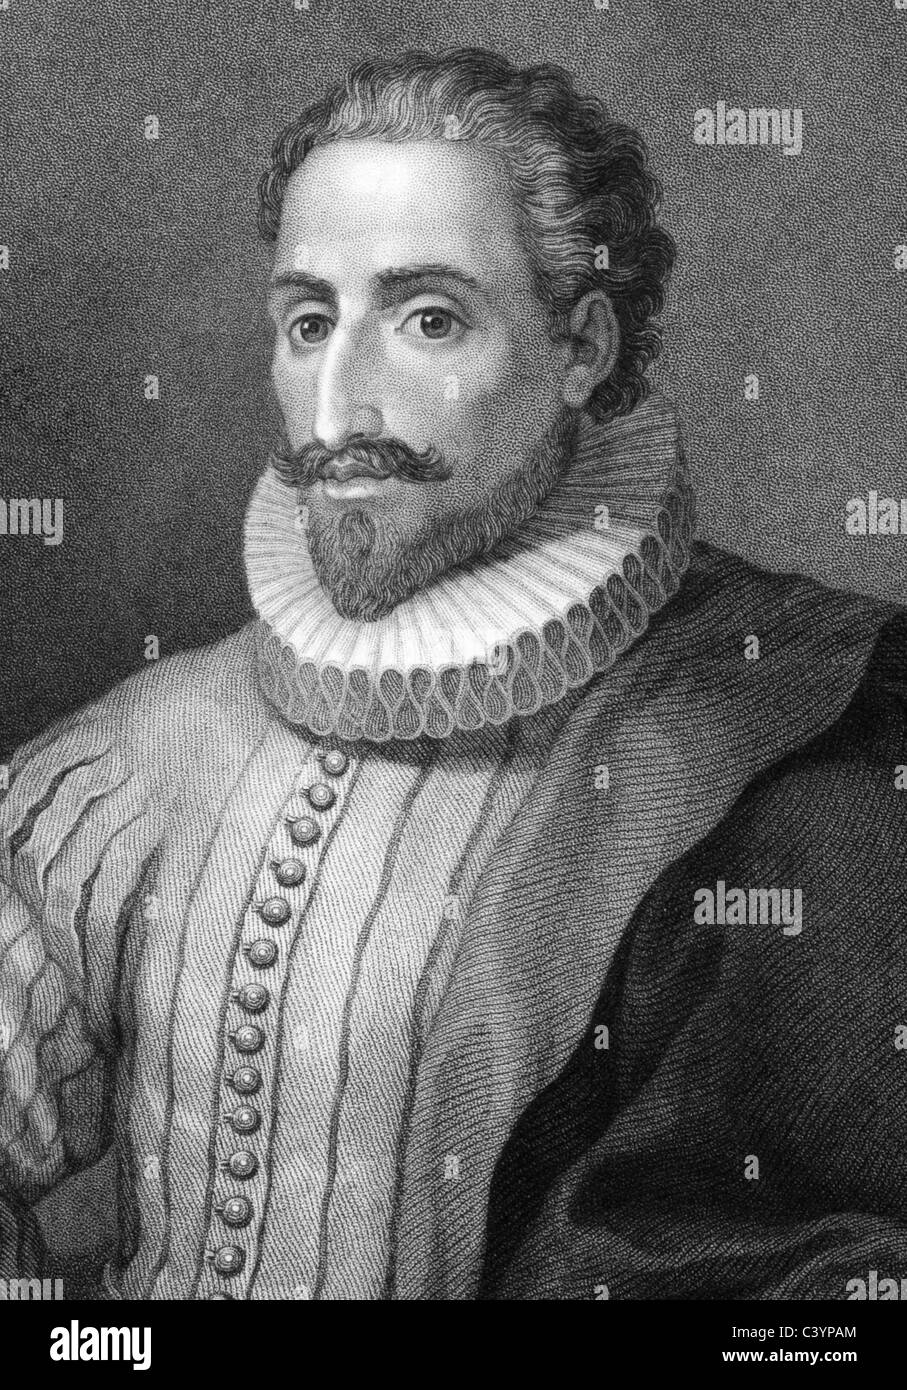 Miguel de Cervantes Saavedra (1547-1616) on engraving from 1800s. Spanish novelist, poet, and playwright. Stock Photo